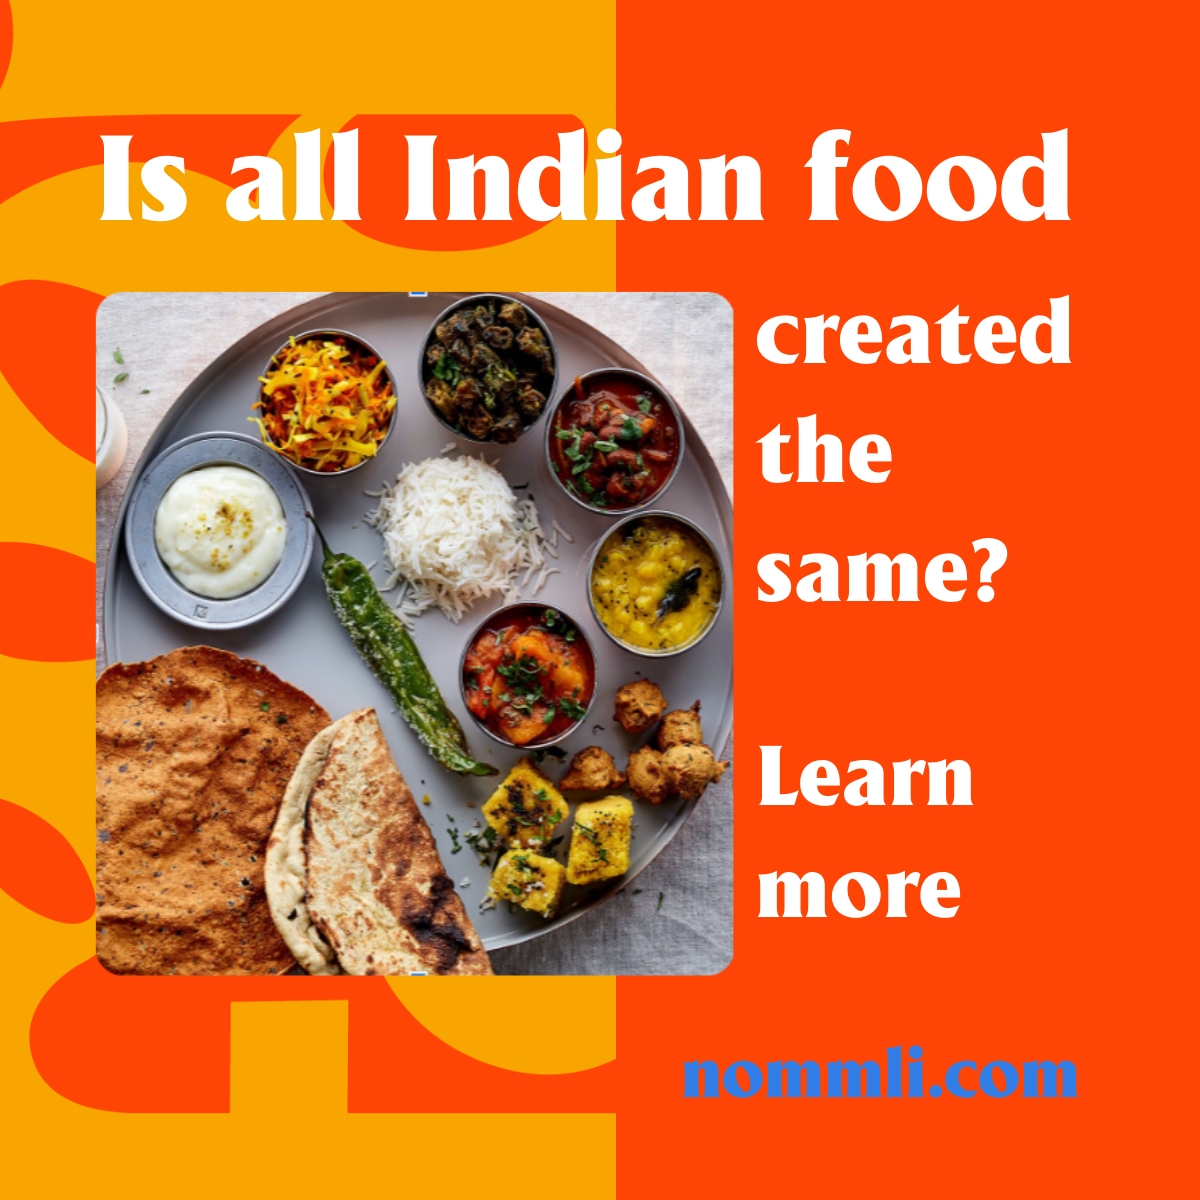 Is all Indian food created the same?